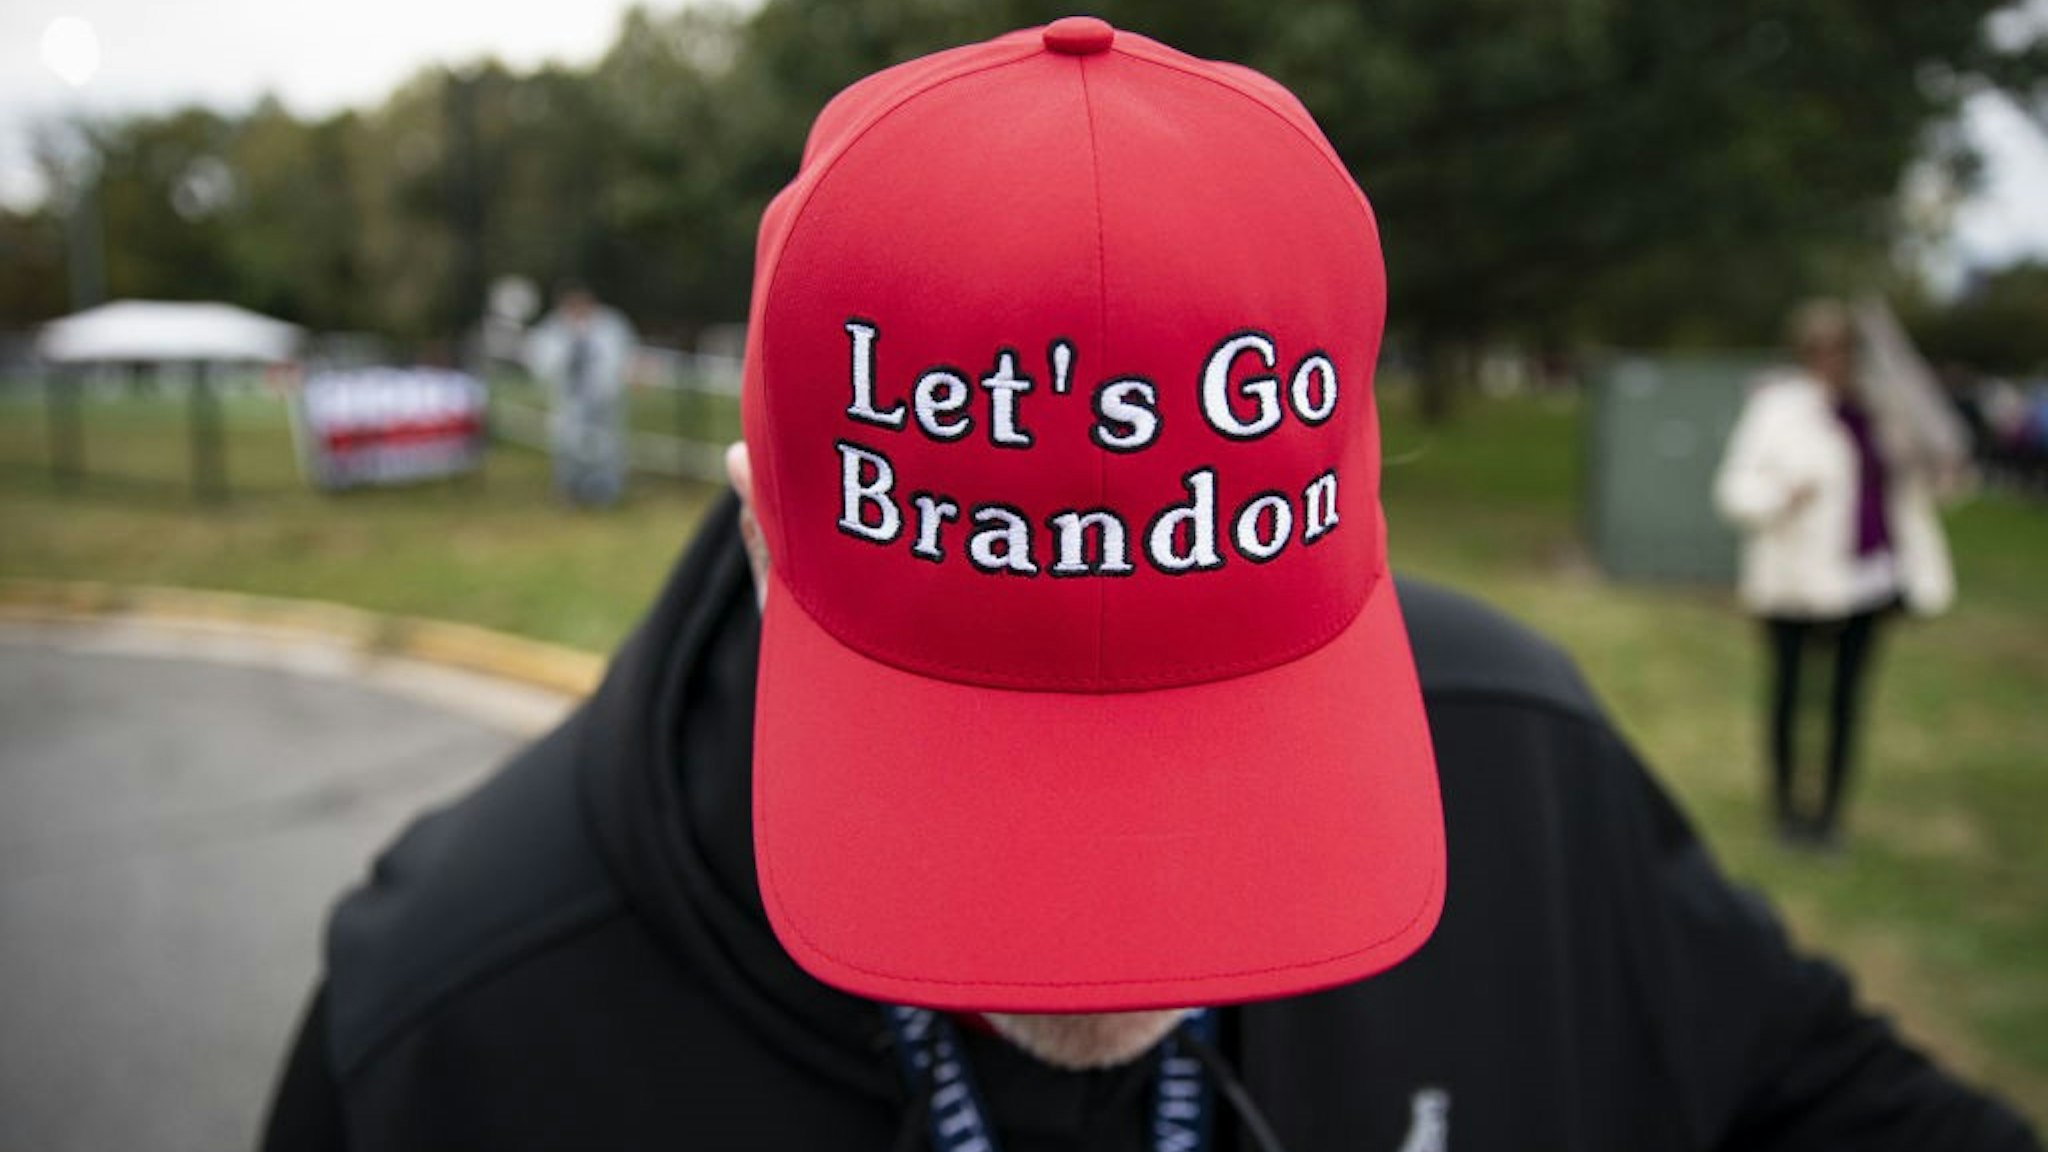 A supporter of former U.S. President Donald Trump displays a "Let's Go Brandon" hat before a campaign event for Terry McAuliffe, Democratic gubernatorial candidate for Virginia, in Arlington, Virginia, U.S., on Tuesday, Oct. 26, 2021. McAuliffe, a former Virginia governor is locked in a dead heat with Glenn Youngkin, a former co-chief executive officer of Carlyle Group Inc., ahead of next week's election. Photographer